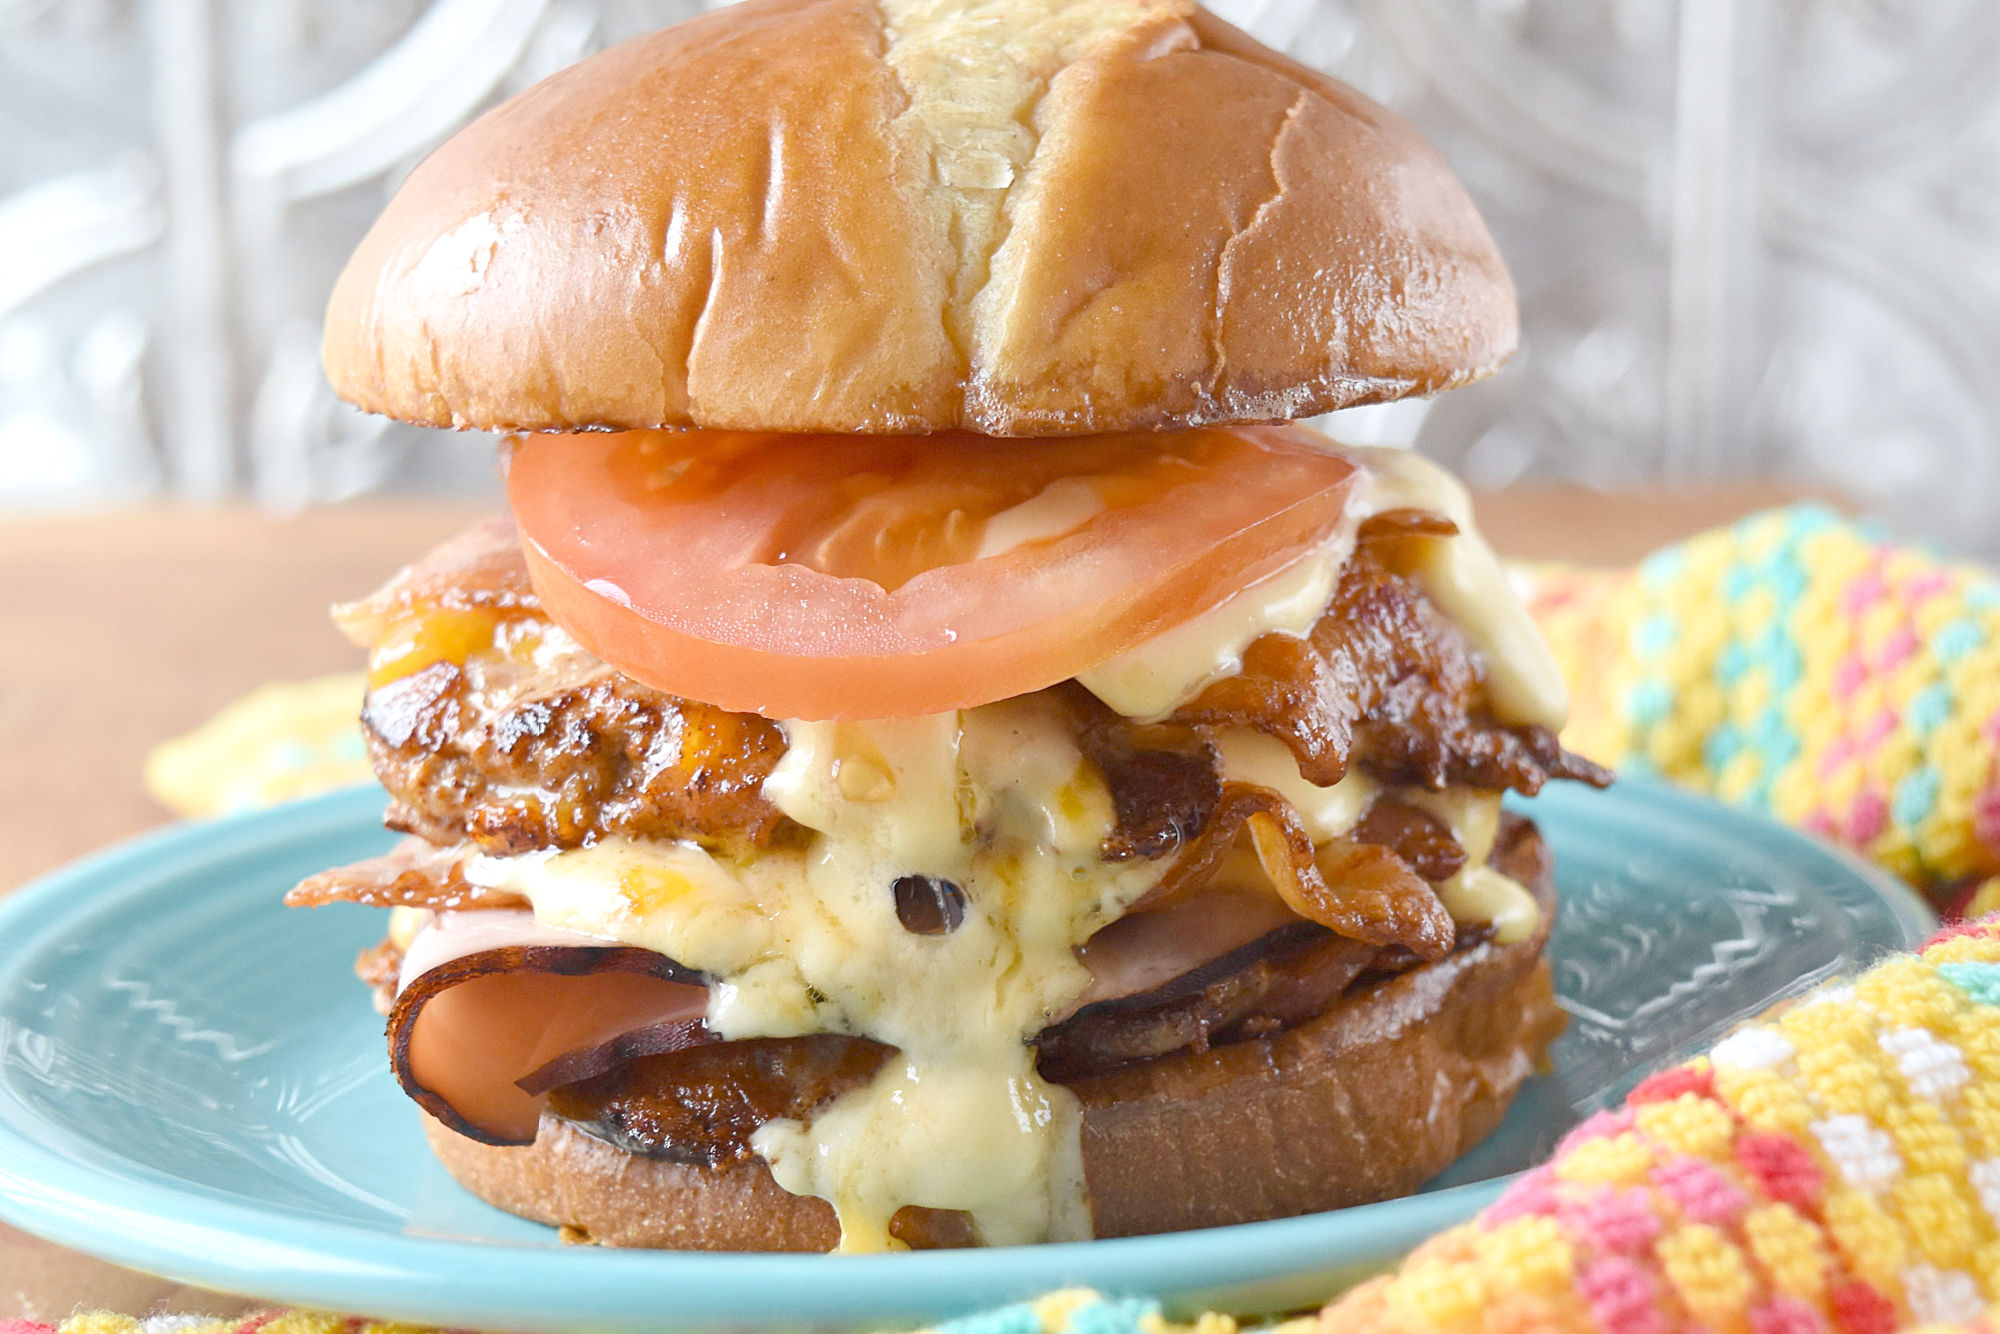 The Hot Brown Burger is a double decker turkey burger topped with bacon, tomato, and a rich cheddar Mornay sauce.  Grab a bib because this burger is deliciously messy. #BurgerMonth